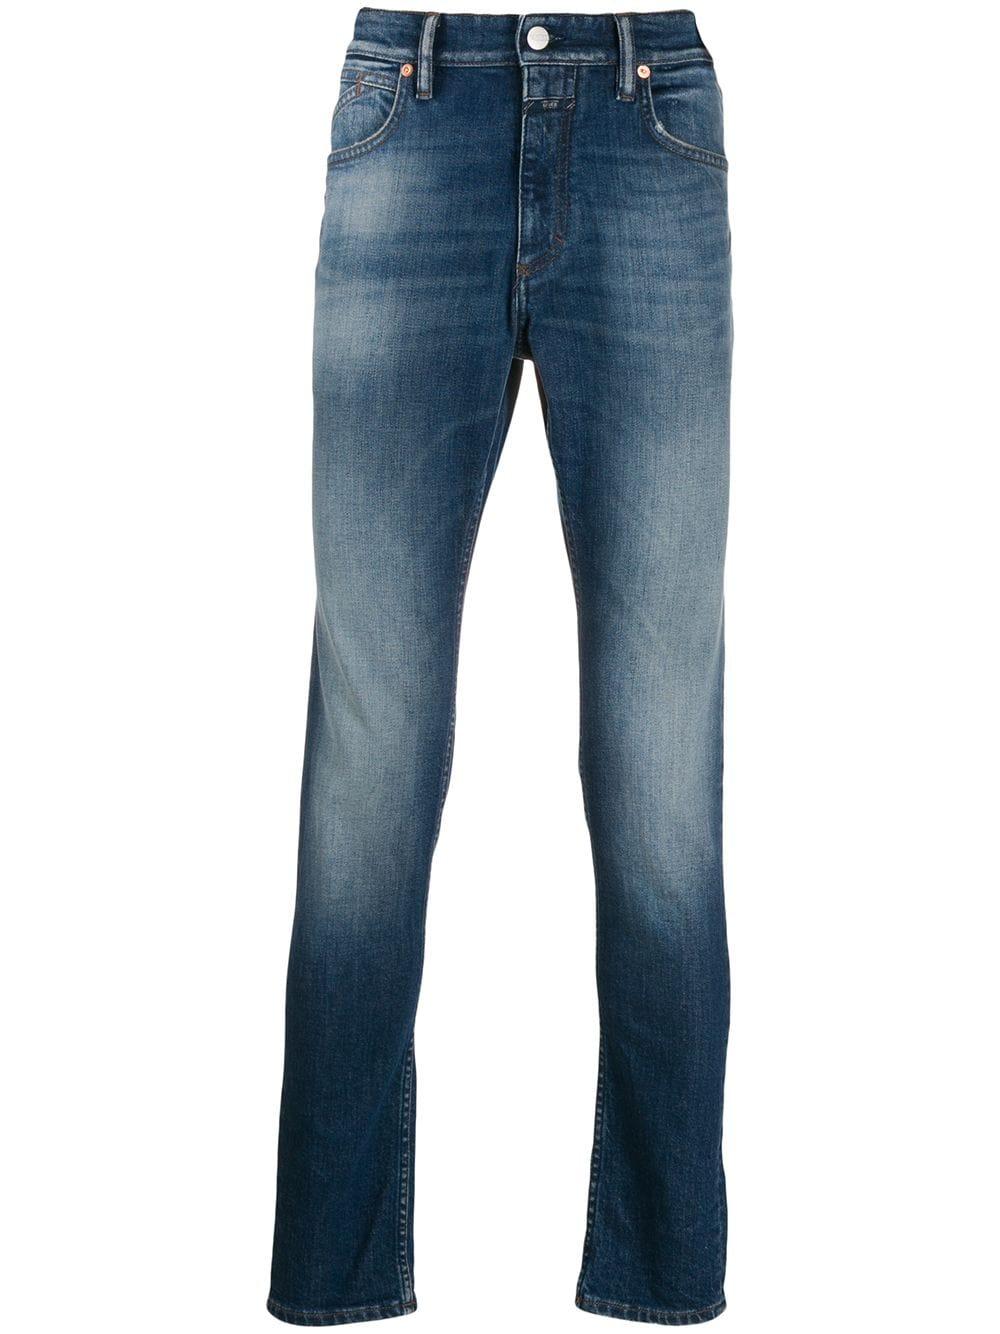 Closed Faded Denim Jeans in Blue for Men - Lyst